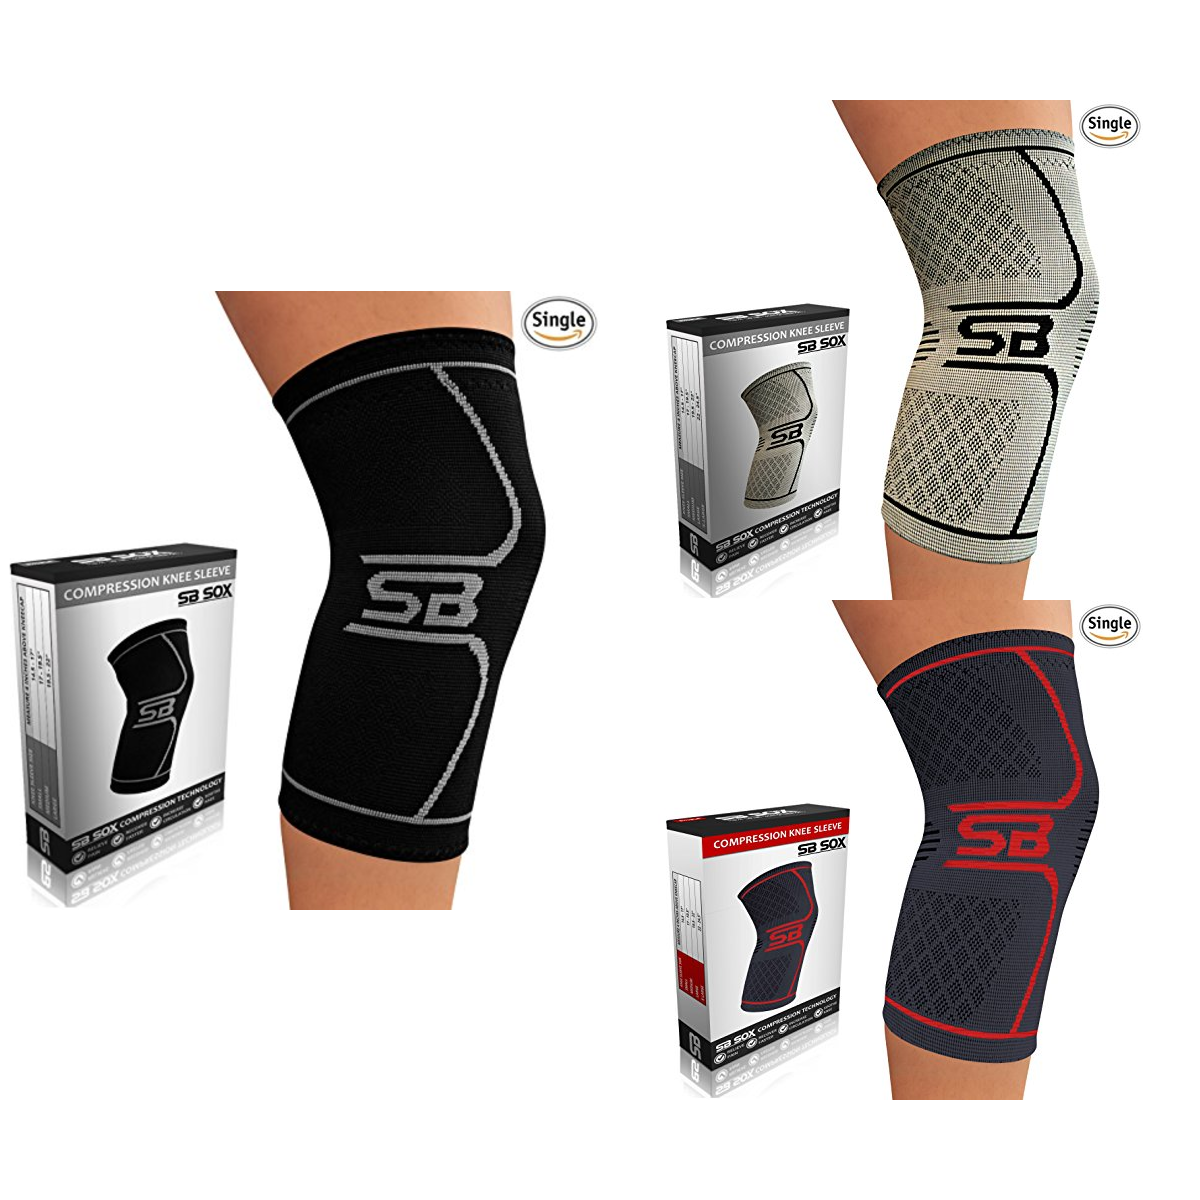 Compression Knee Brace for Knee Pain - Braces and Supports Knee for Pain Relief - Everyday Crosstrain